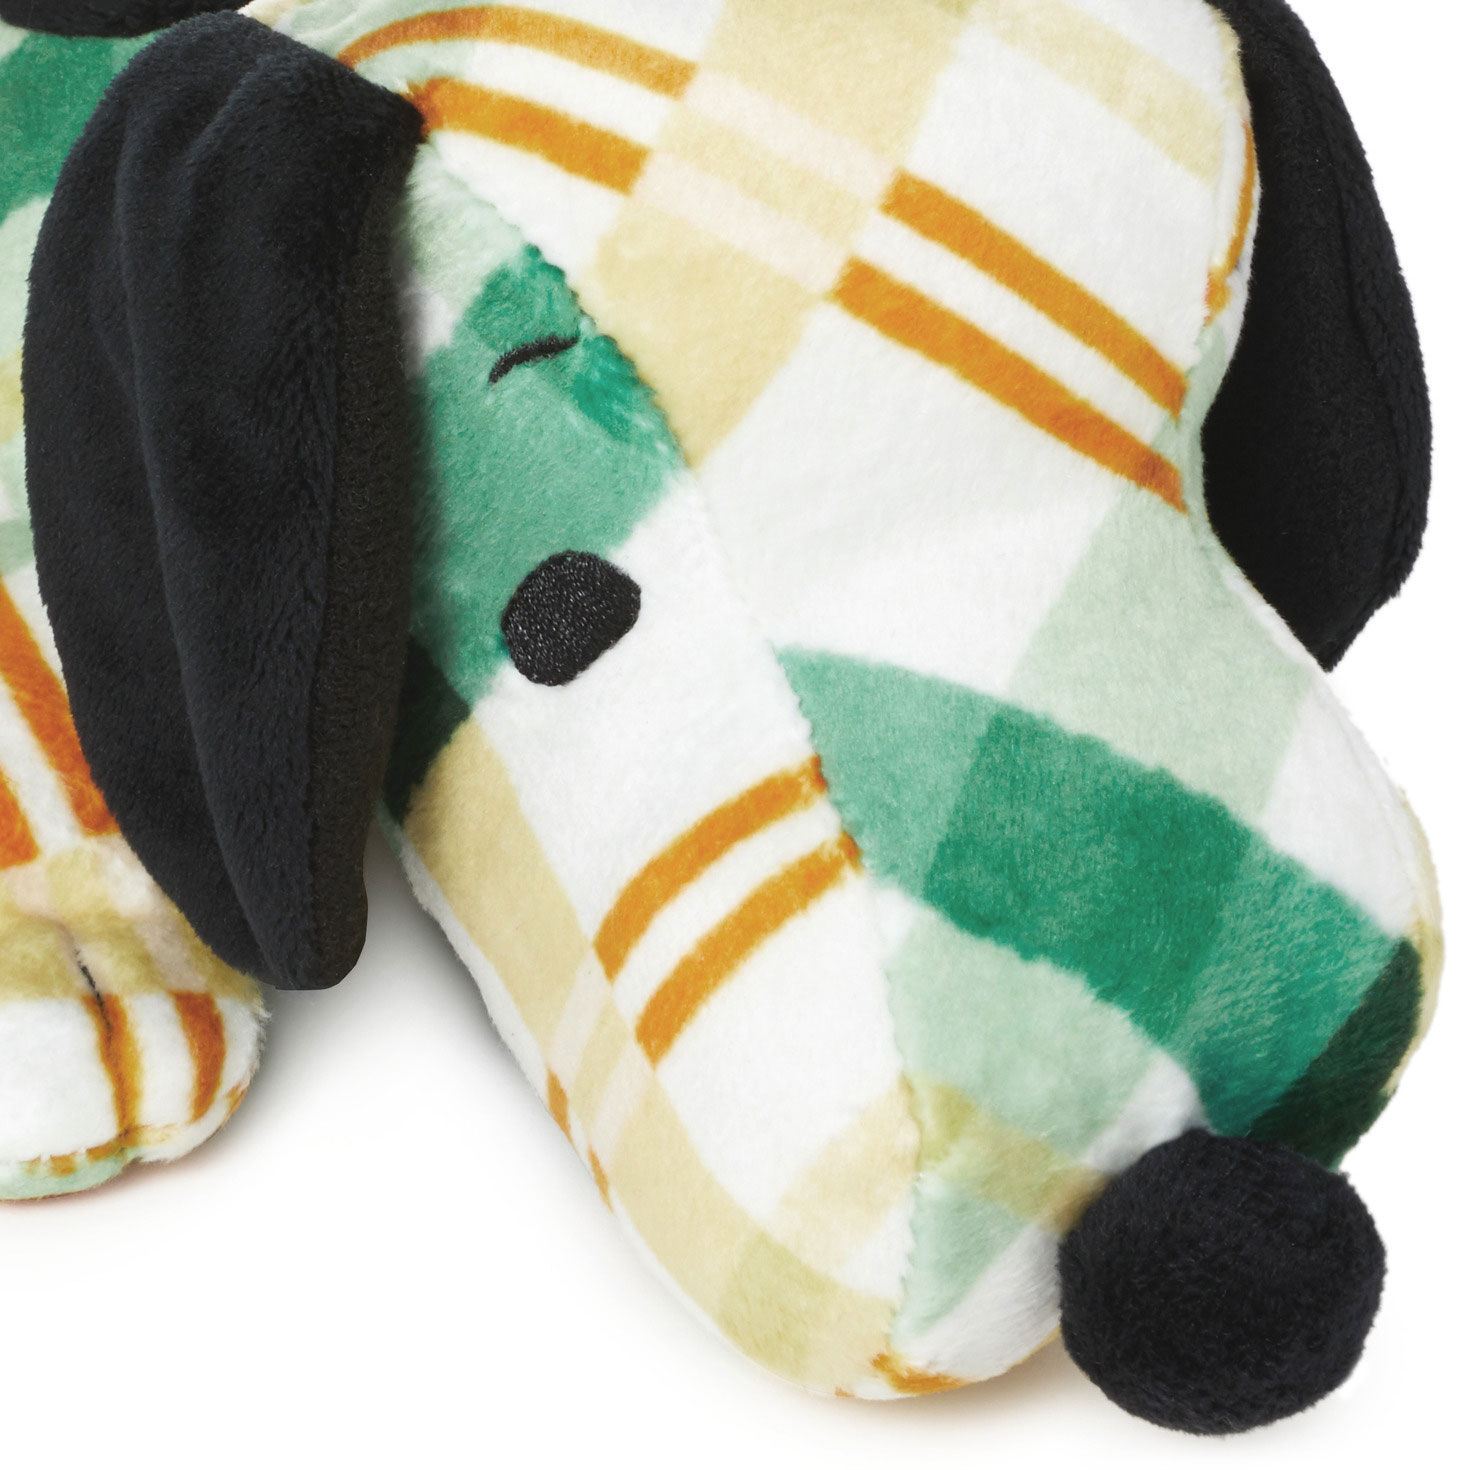 Peanuts® Beagle Scouts Floppy Snoopy Plush, 10" for only USD 16.99 | Hallmark